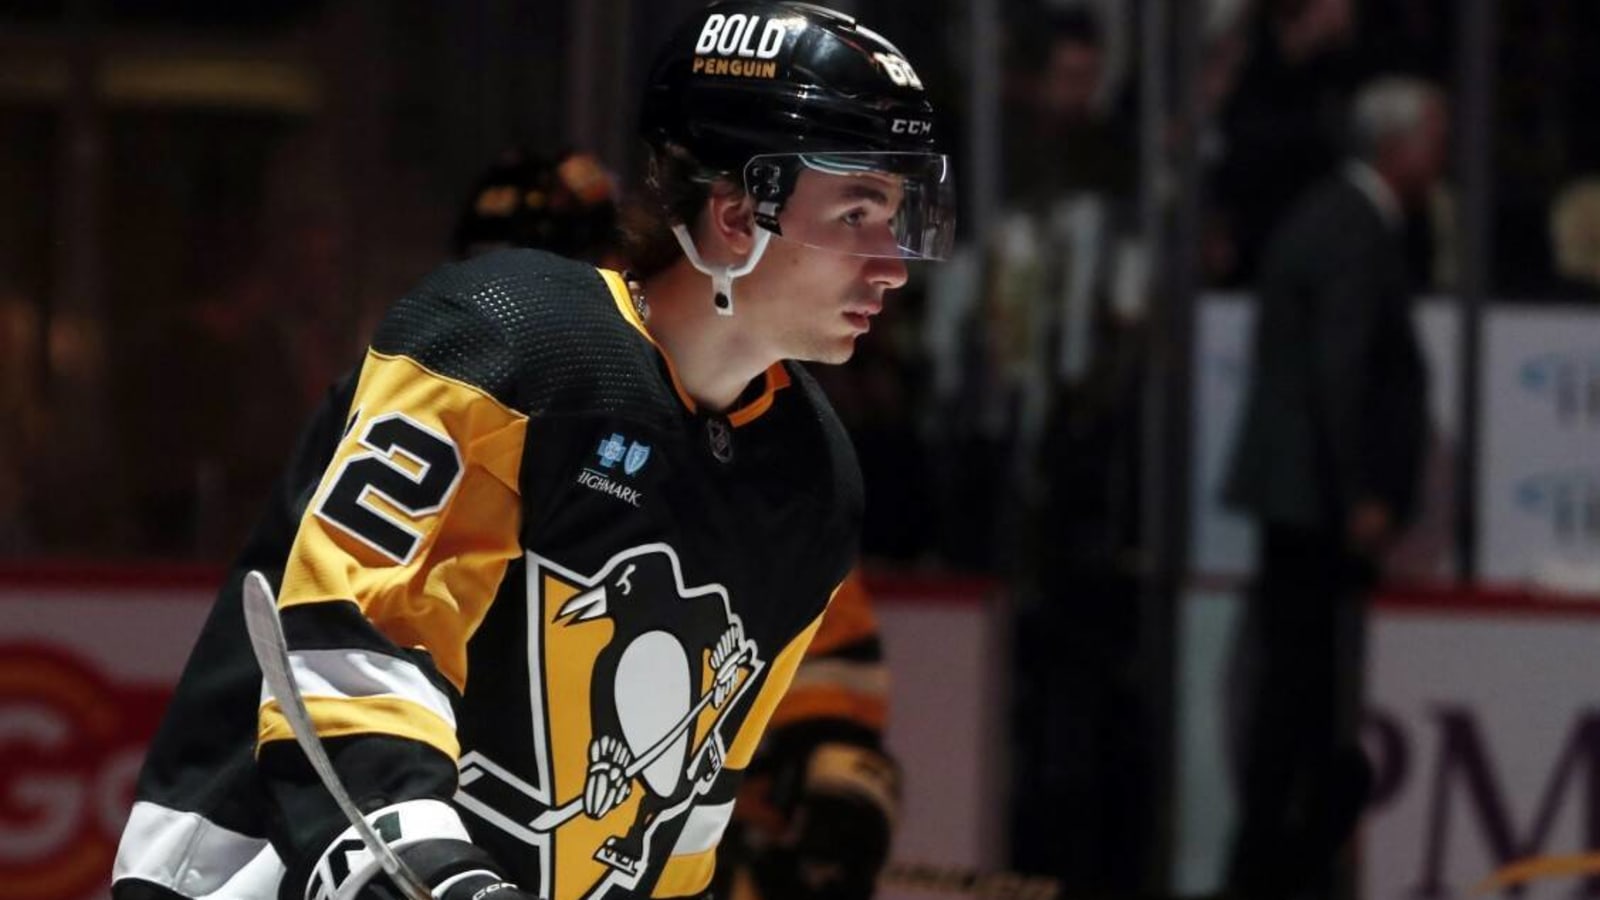 Top Penguins Prospect Records Pair of Shorthanded Goals